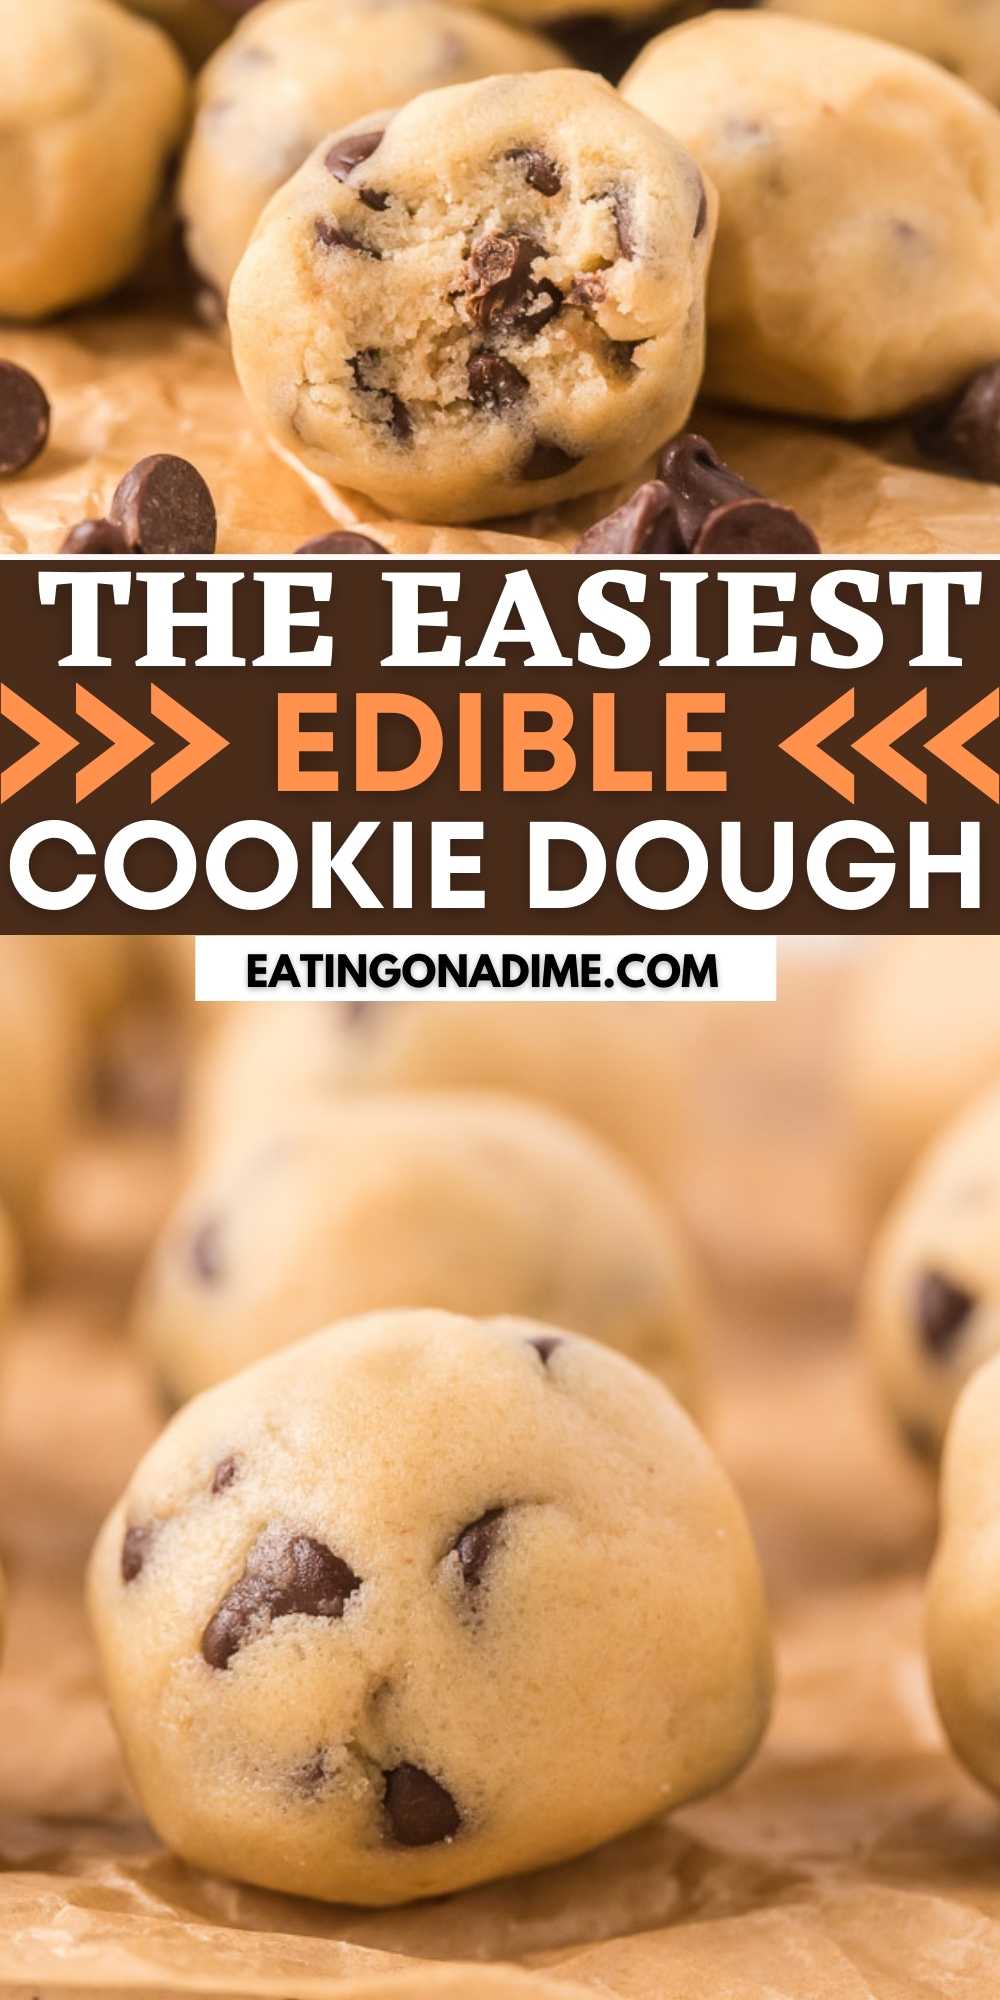 This edible cookie dough is easy to make without eggs.  Everyone loves this edible chocolate chip cookie dough that can be made in minutes.  Forget baking!  This edible cookie dough recipe is the best dessert that the entire family will love! #eatingonadime #cookiedough #cookierecipes #easydessertrecipes #chocolaterecipes 
